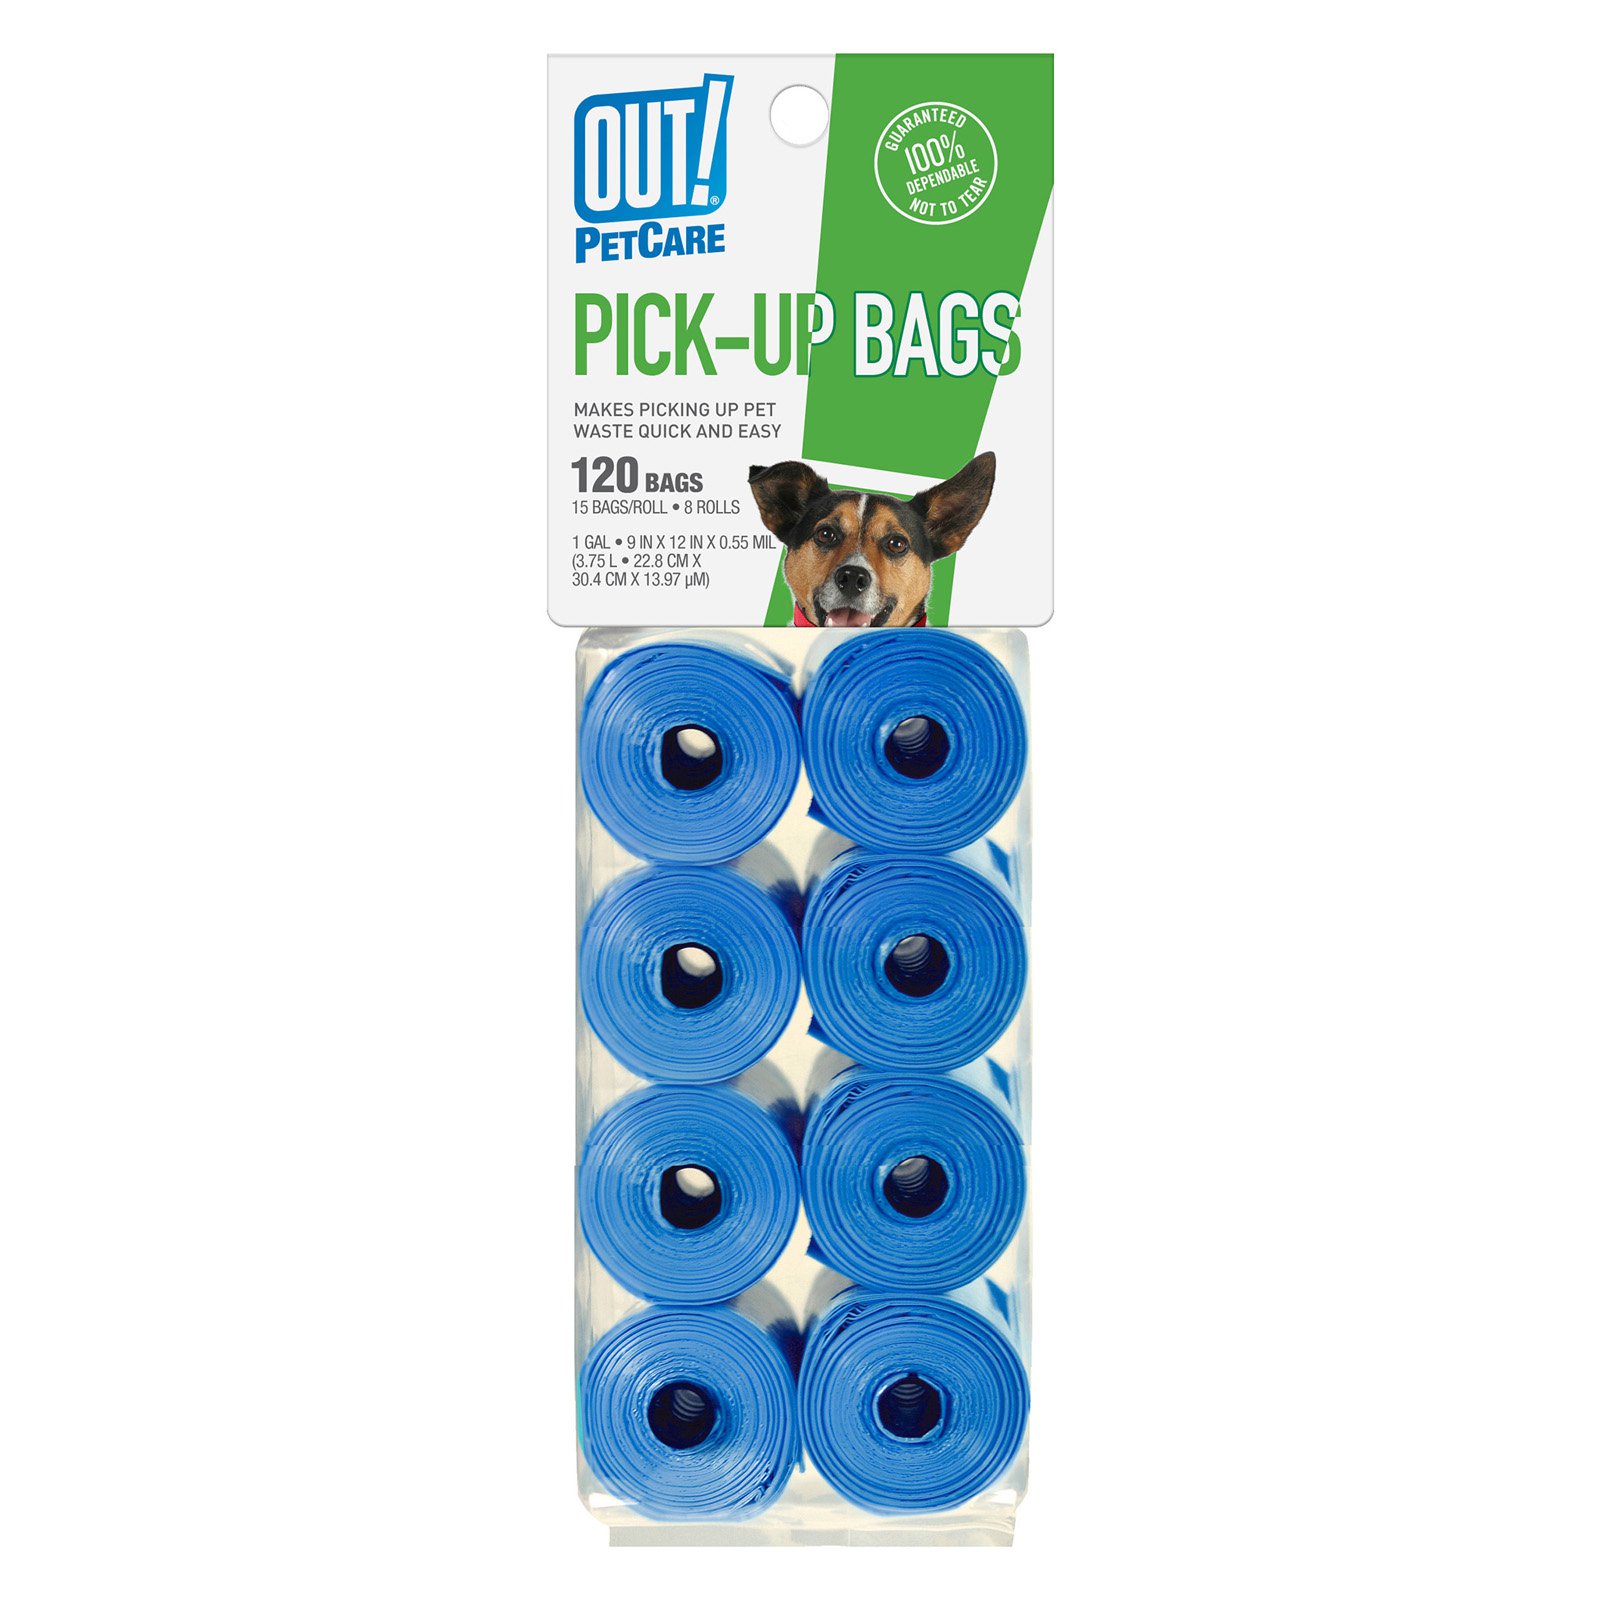 OUT! Blue Pick-up Bags Refill - 120ct. - image 1 of 2